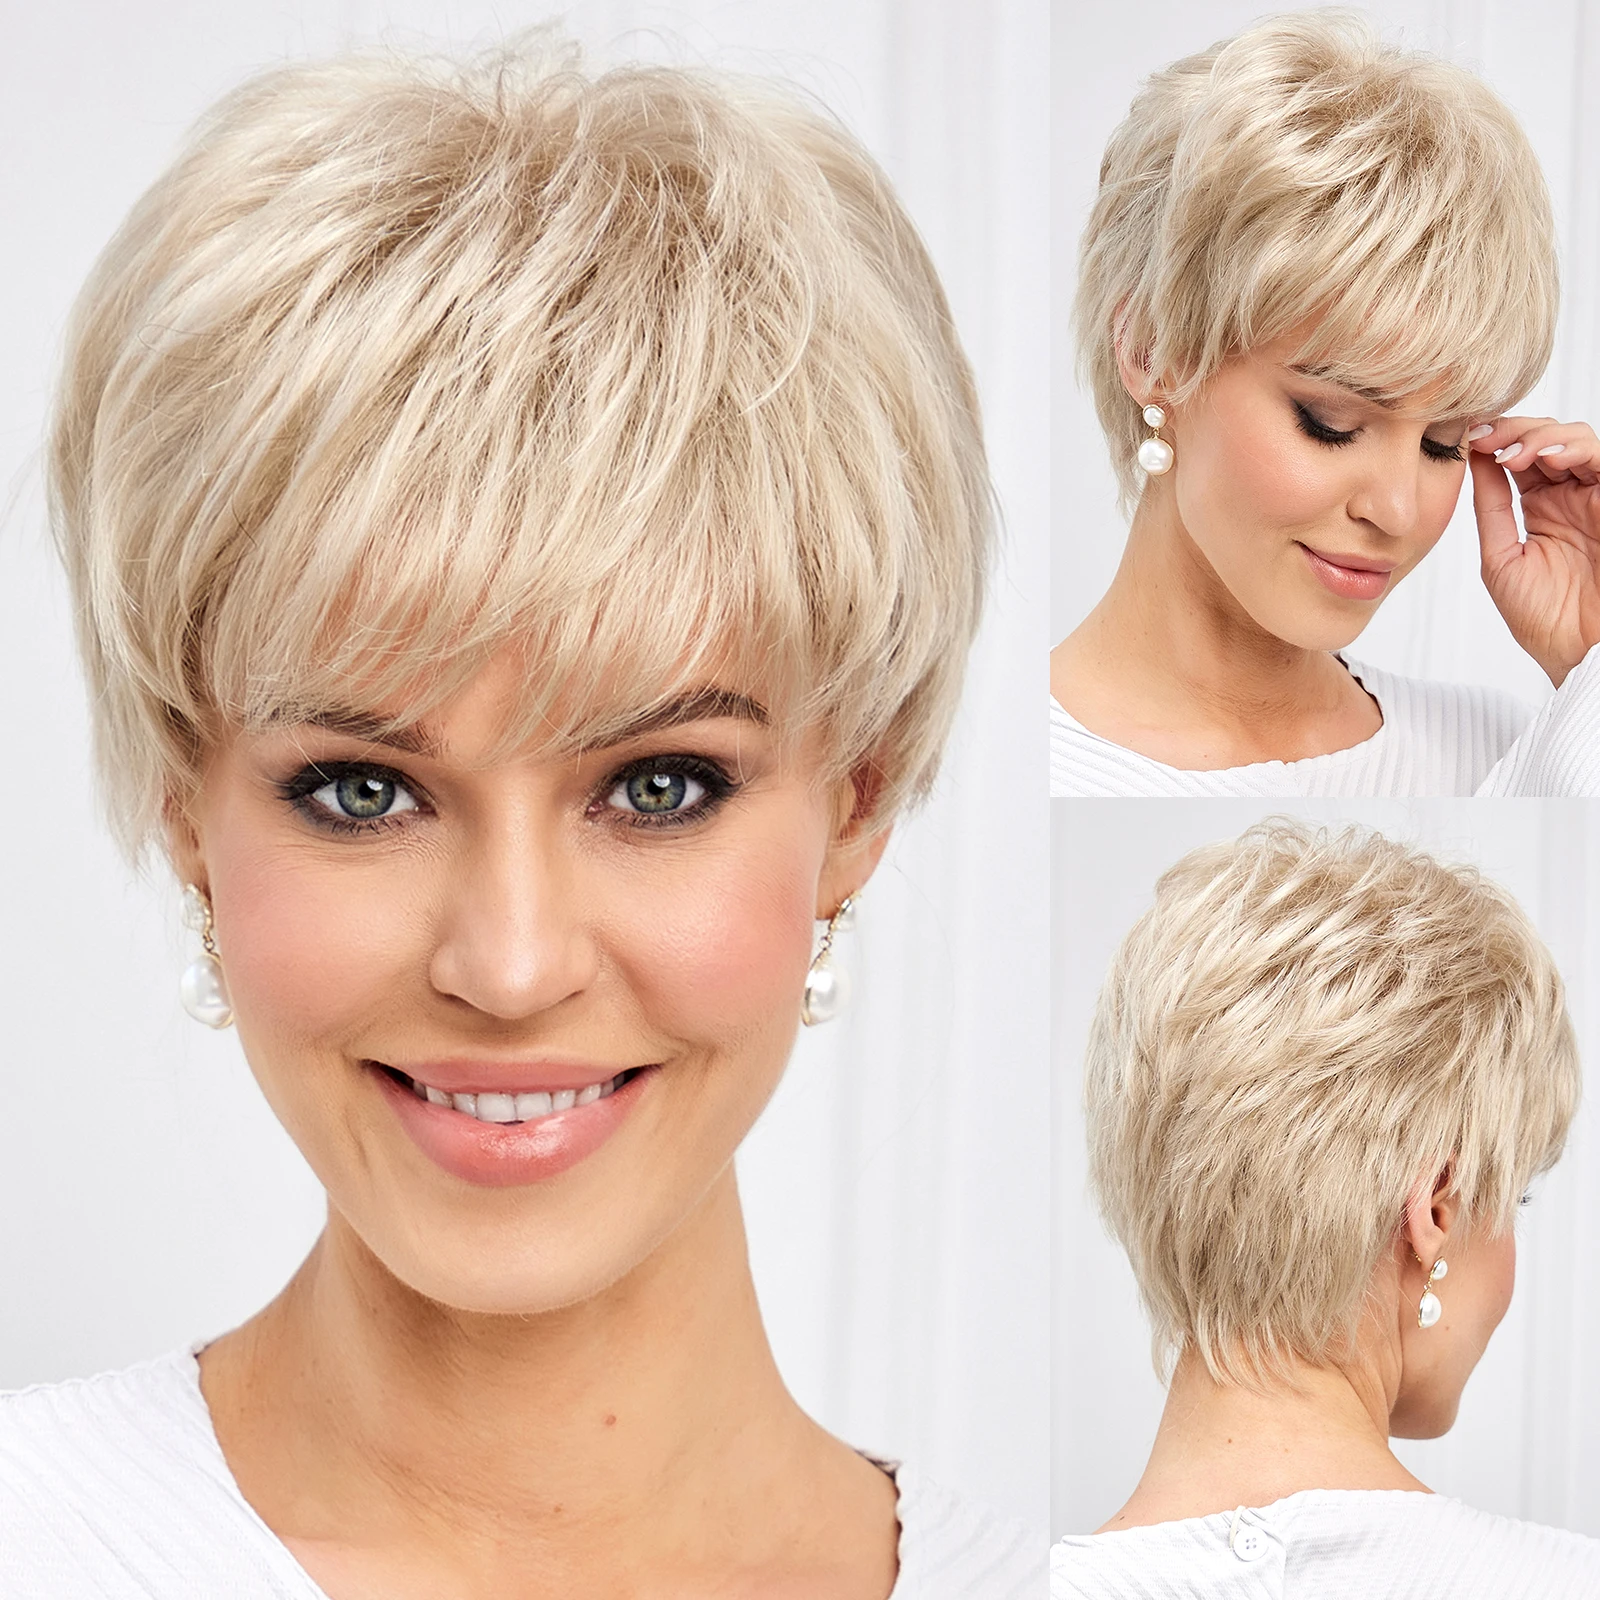 short-blonde-synthetic-blend-wigs-for-women-straight-layered-wigs-with-bangs-natural-daily-blend-hairs-kanekalon-synthetic-wig